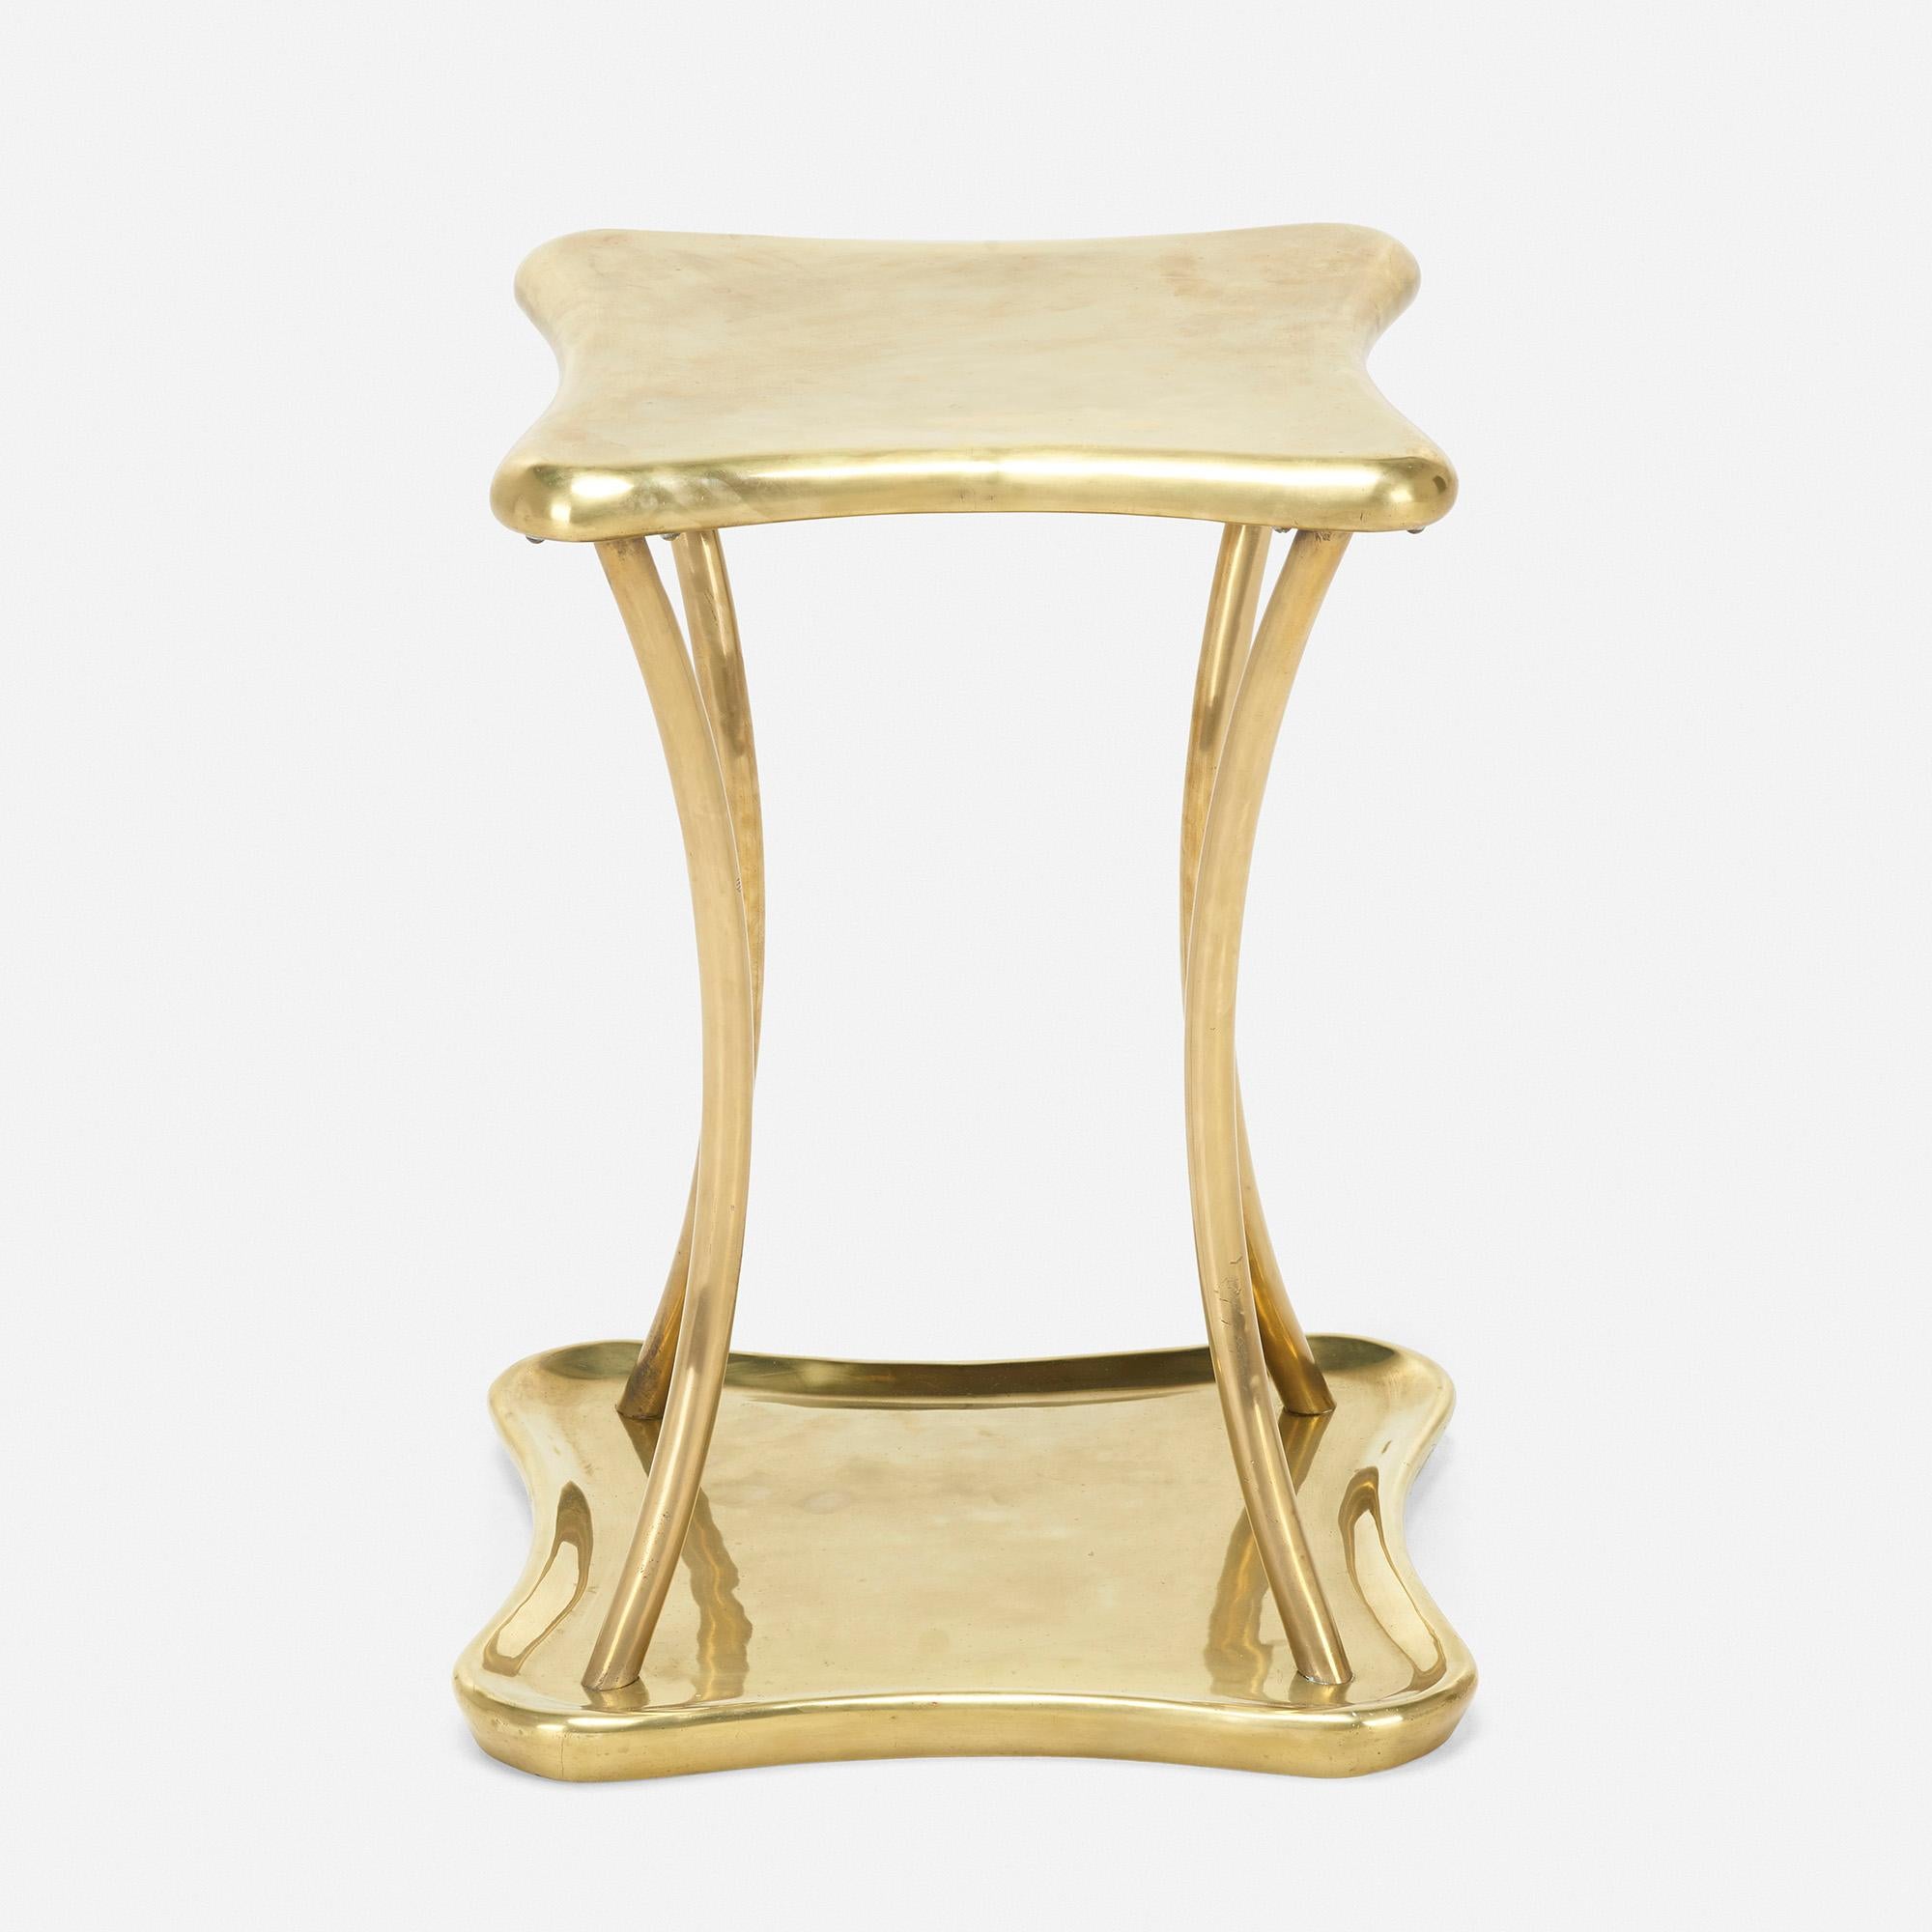 Aesthetic Movement Aesthetic Style Brass Table